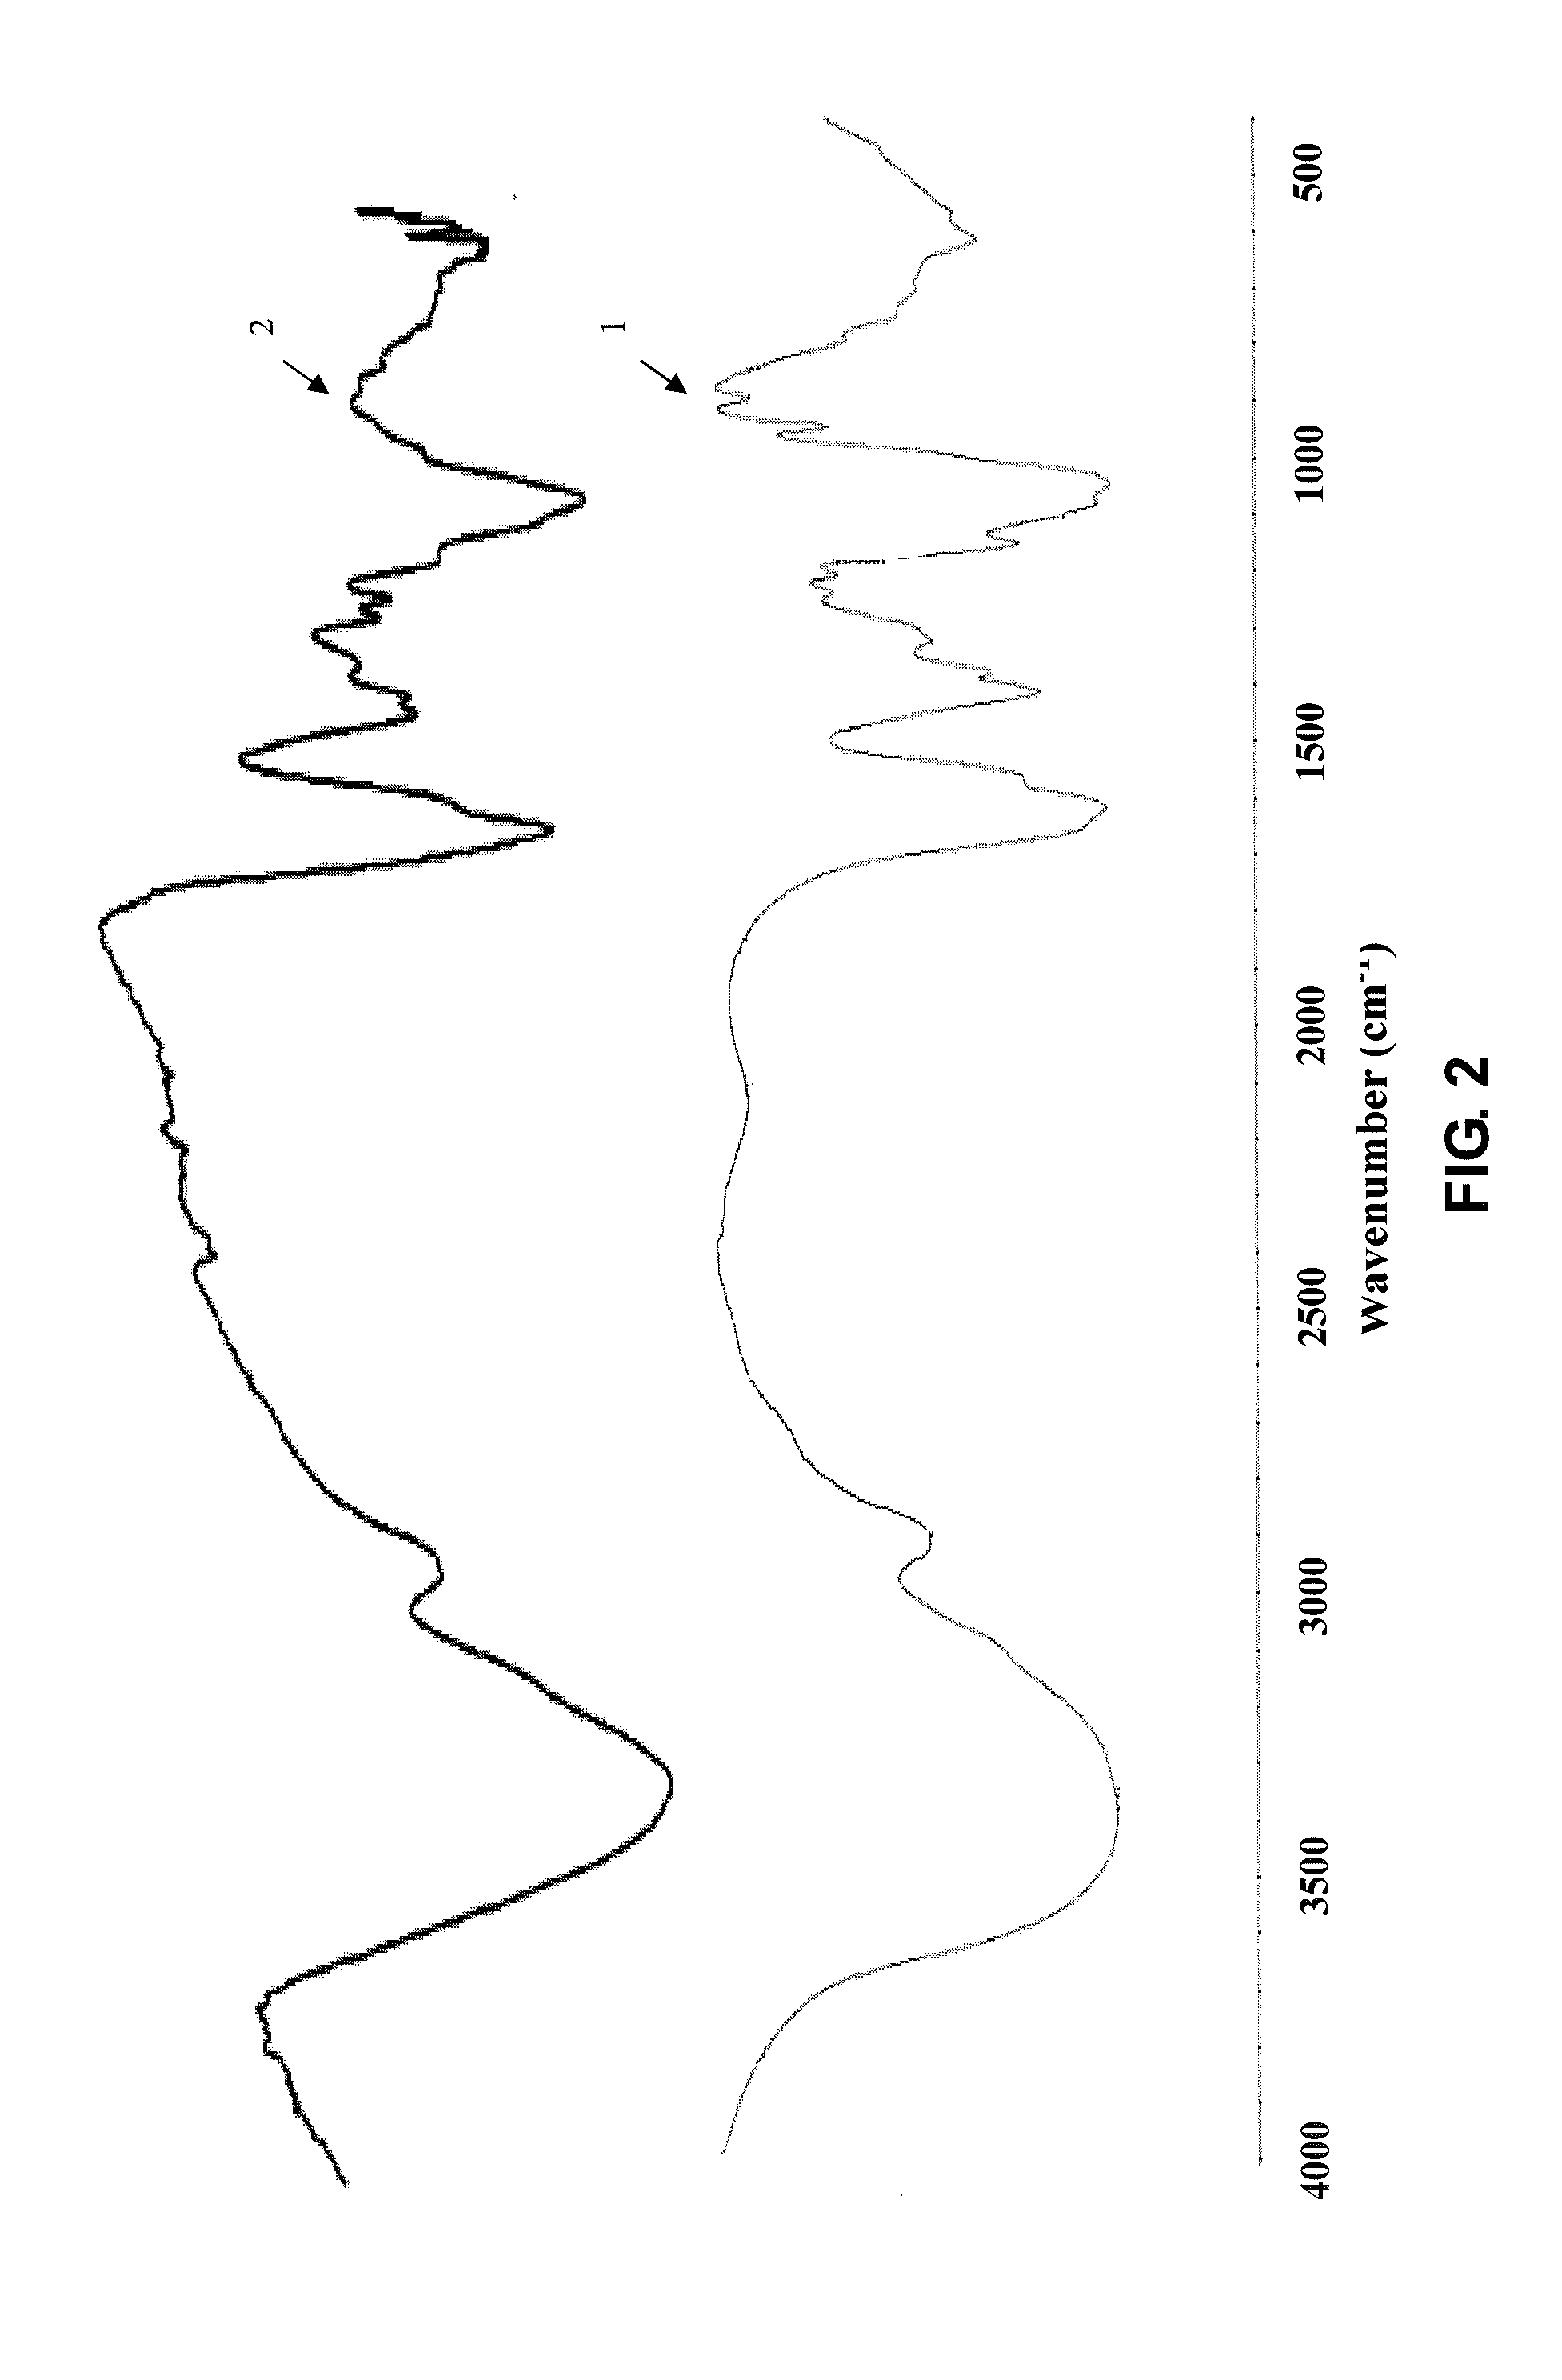 Cross-linked sodium hyaluronate gel for tissue filler for plastic surgery and preparation method thereof